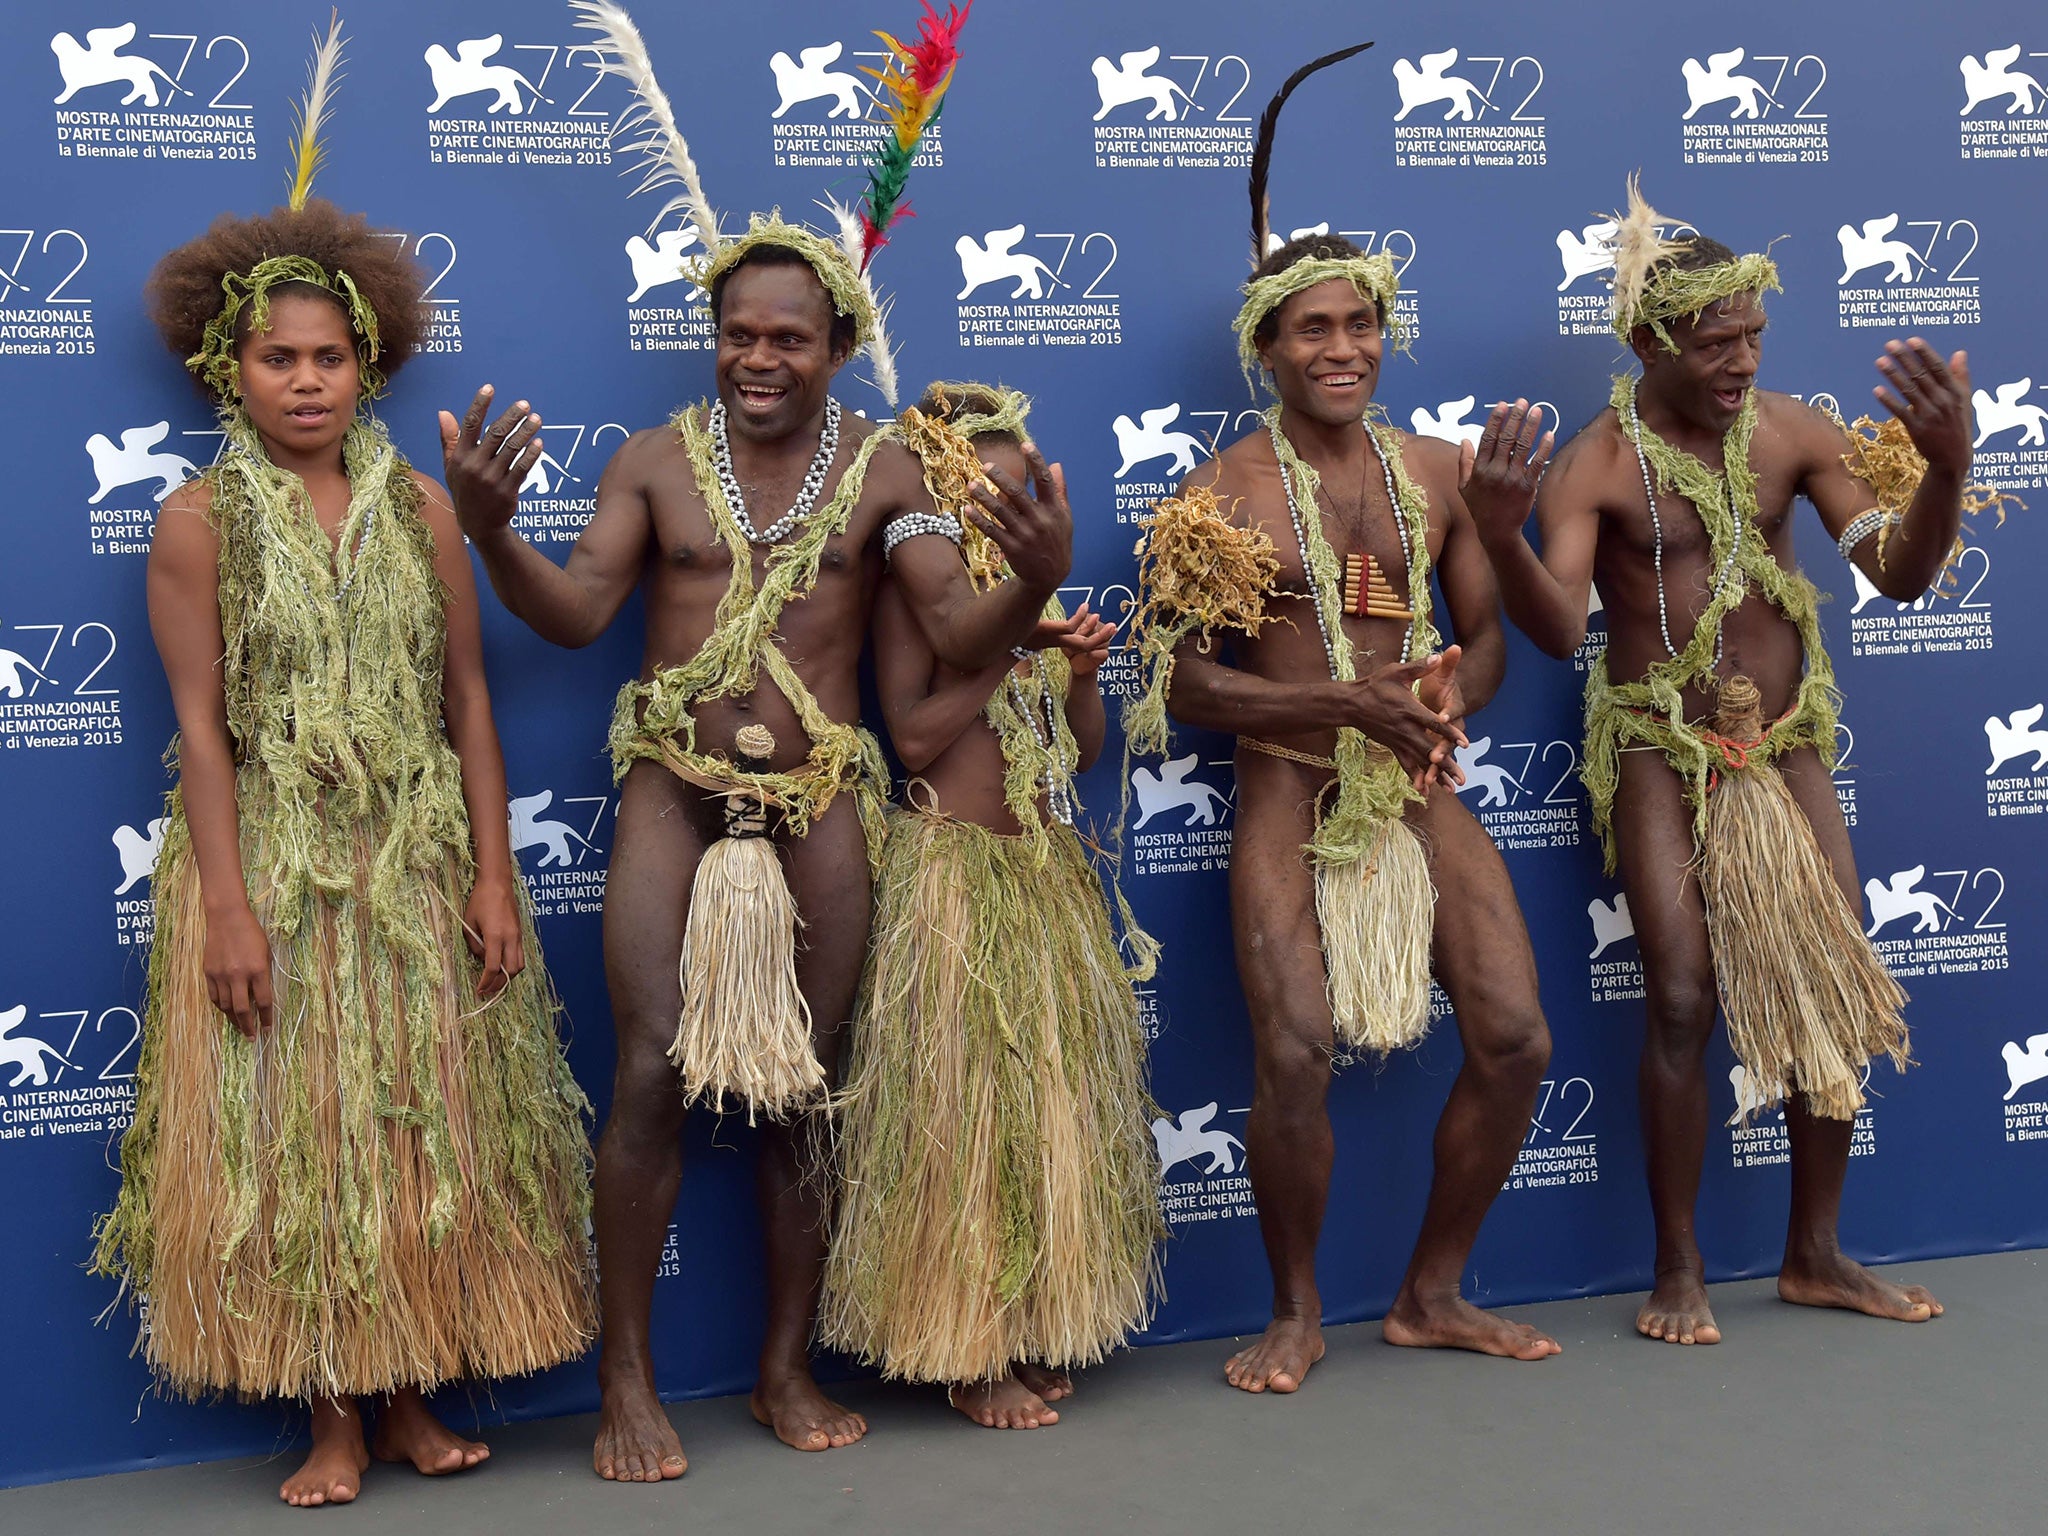 Members of the tribe from Vanuatu’s remote Tanna island pose for the media before the screening of their film at the Venice Film Festival